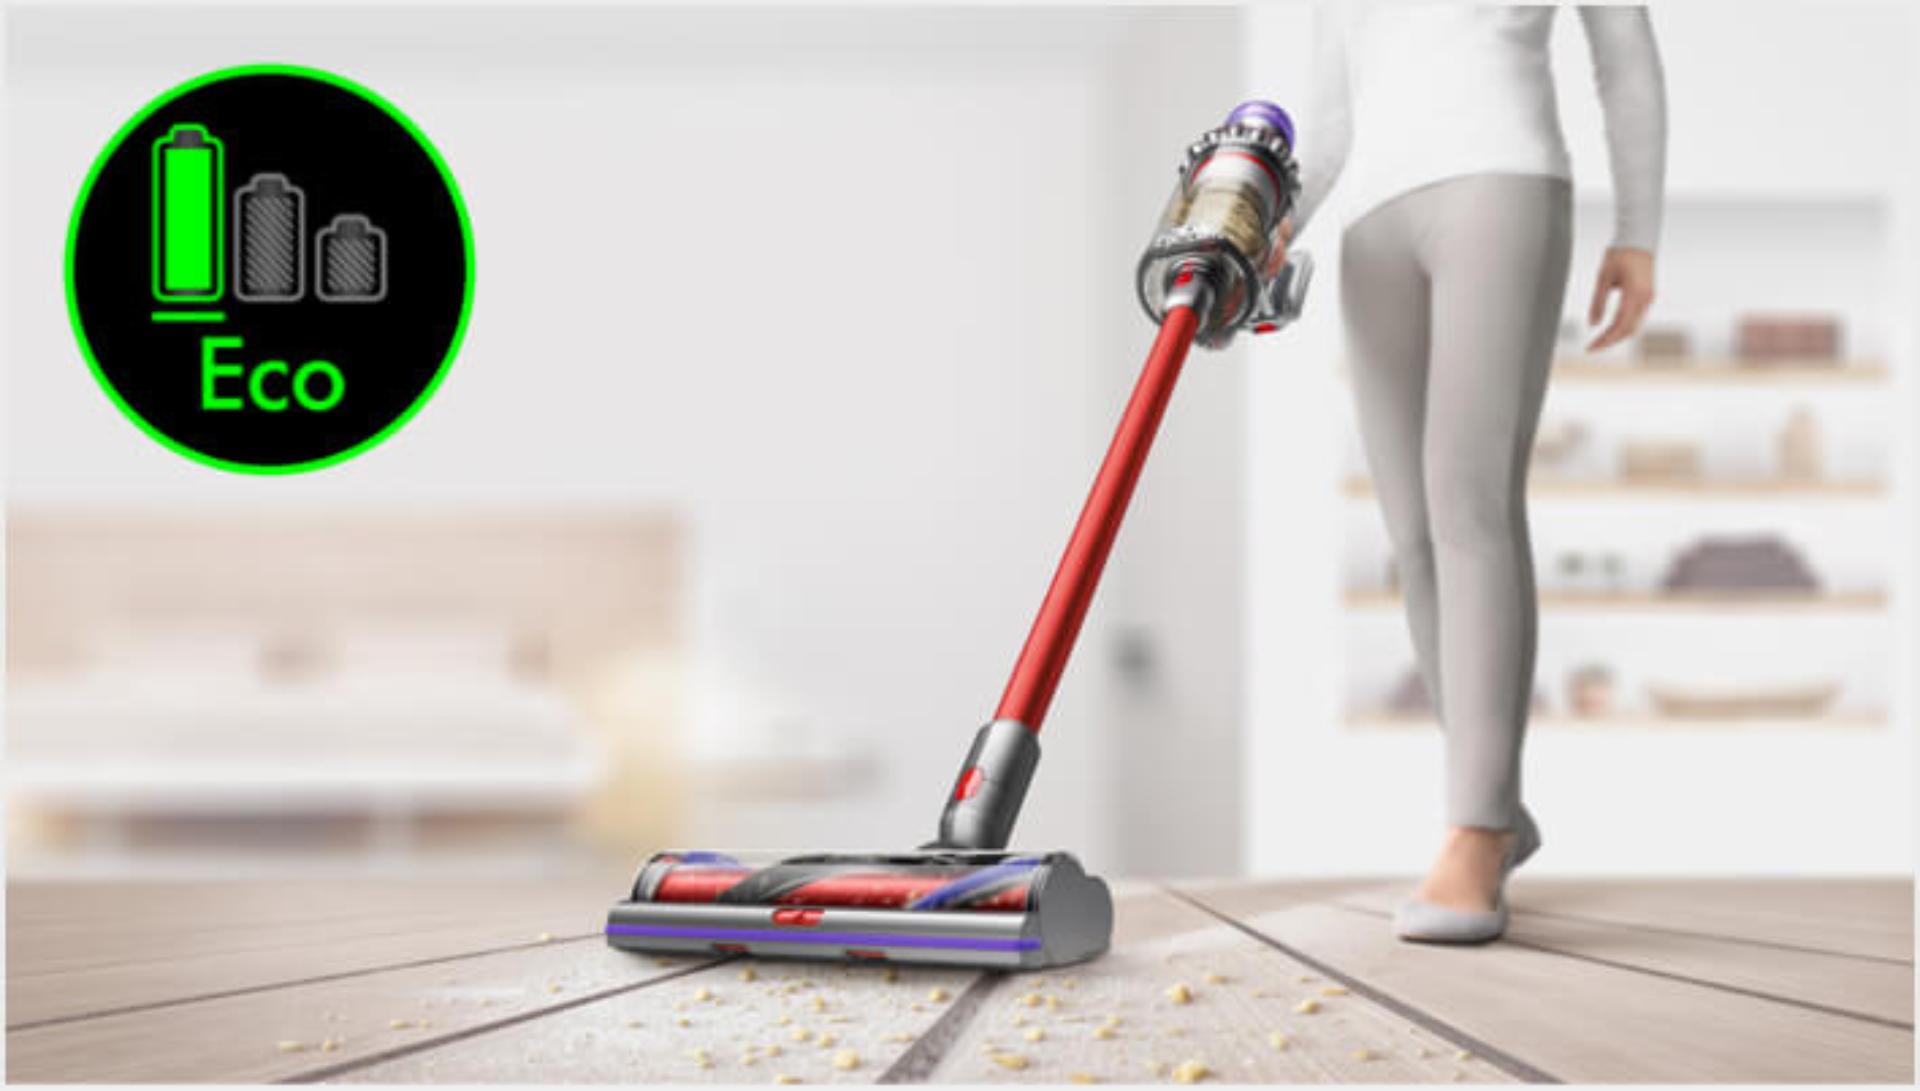 Dyson V11 vacuum in use